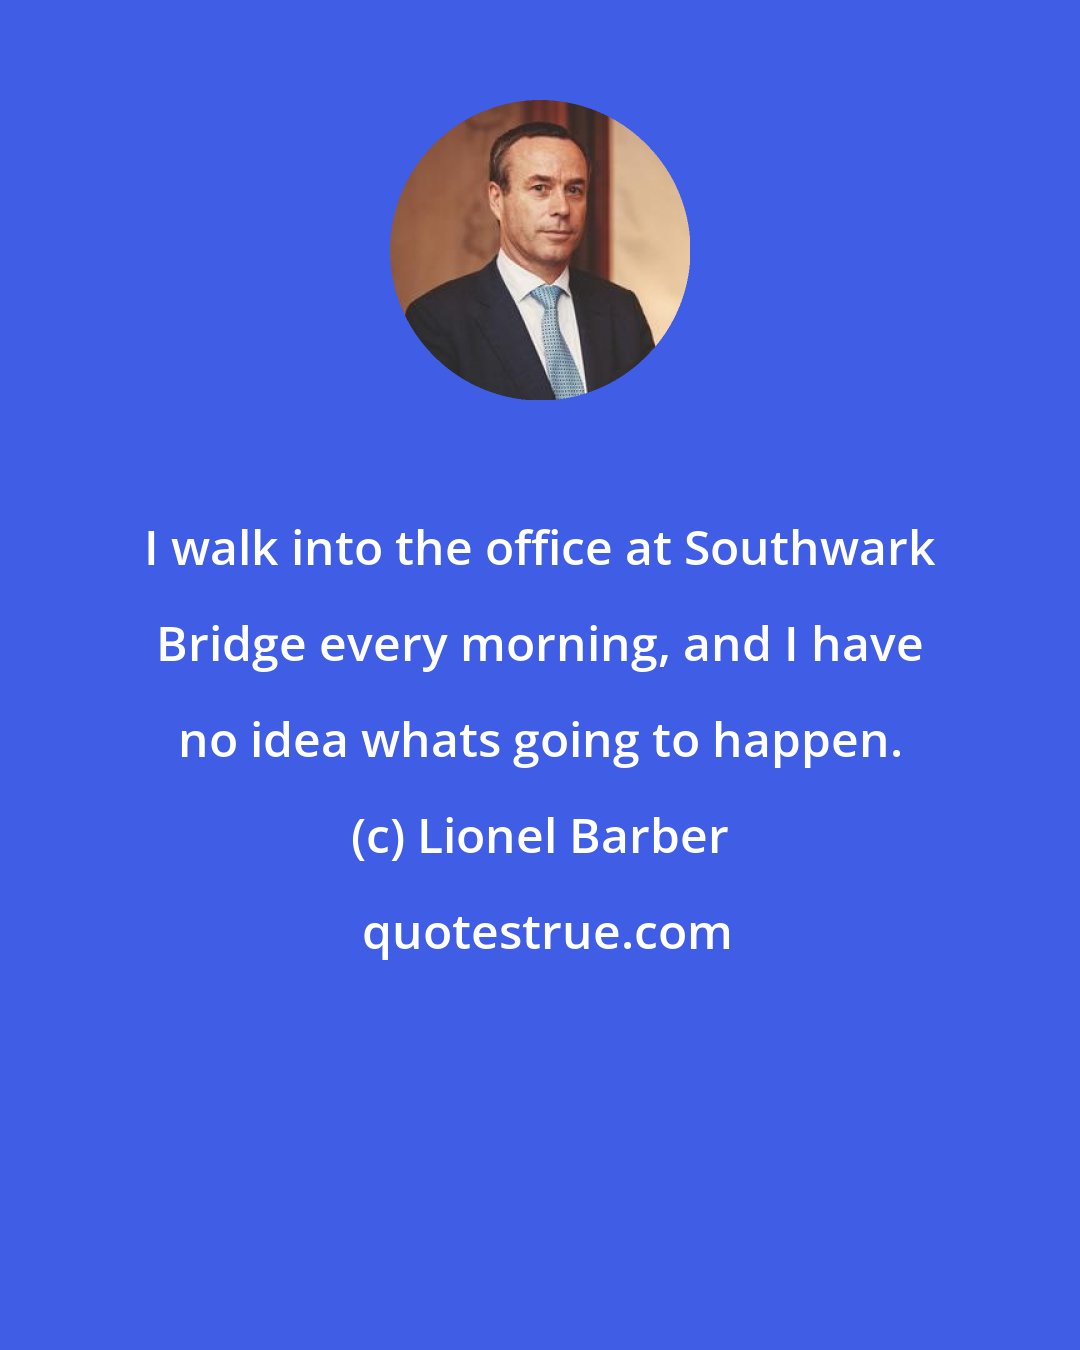 Lionel Barber: I walk into the office at Southwark Bridge every morning, and I have no idea whats going to happen.